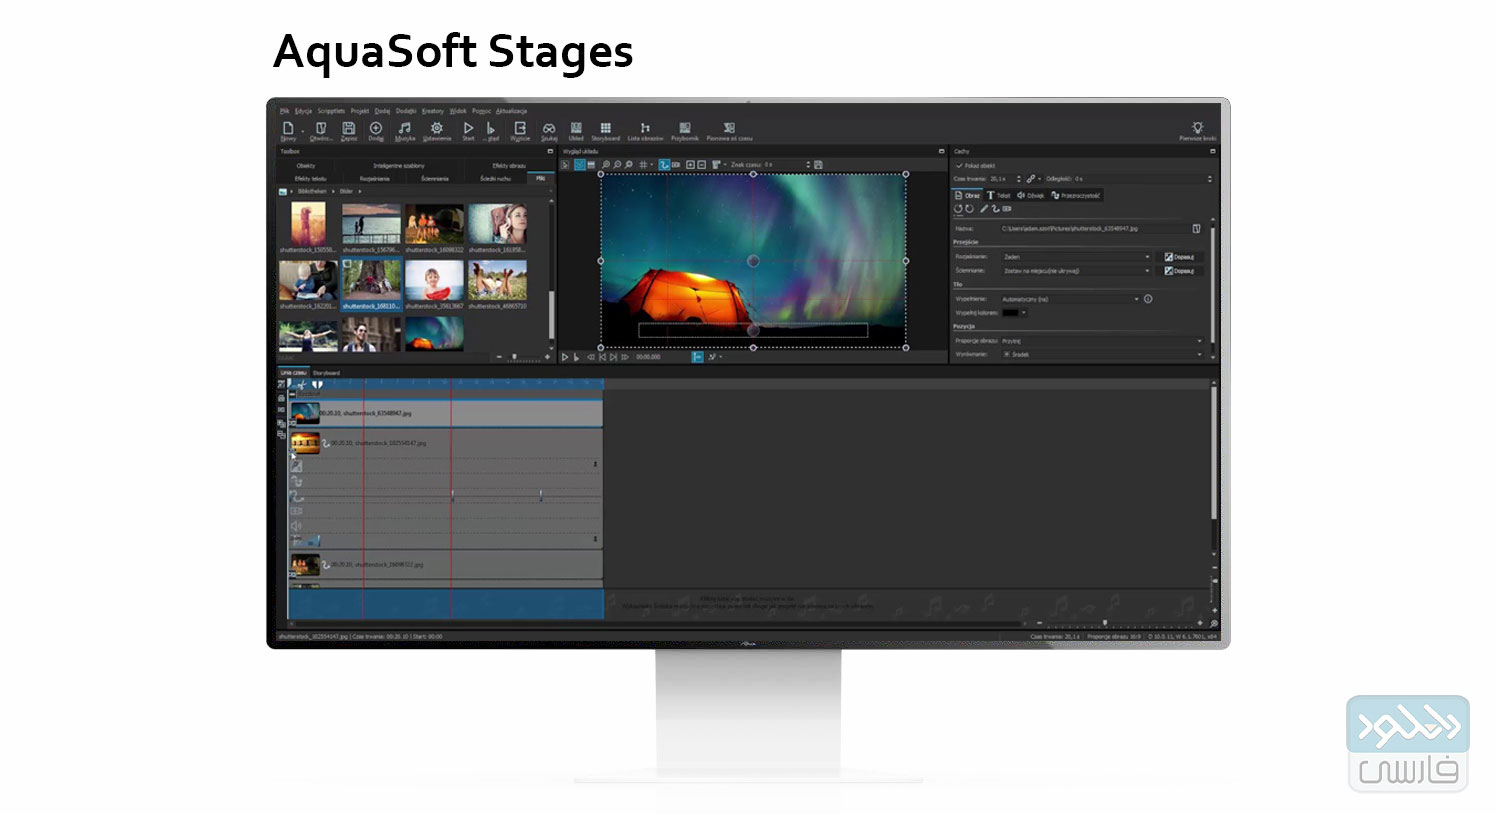 download the new for android AquaSoft Stages 14.2.09